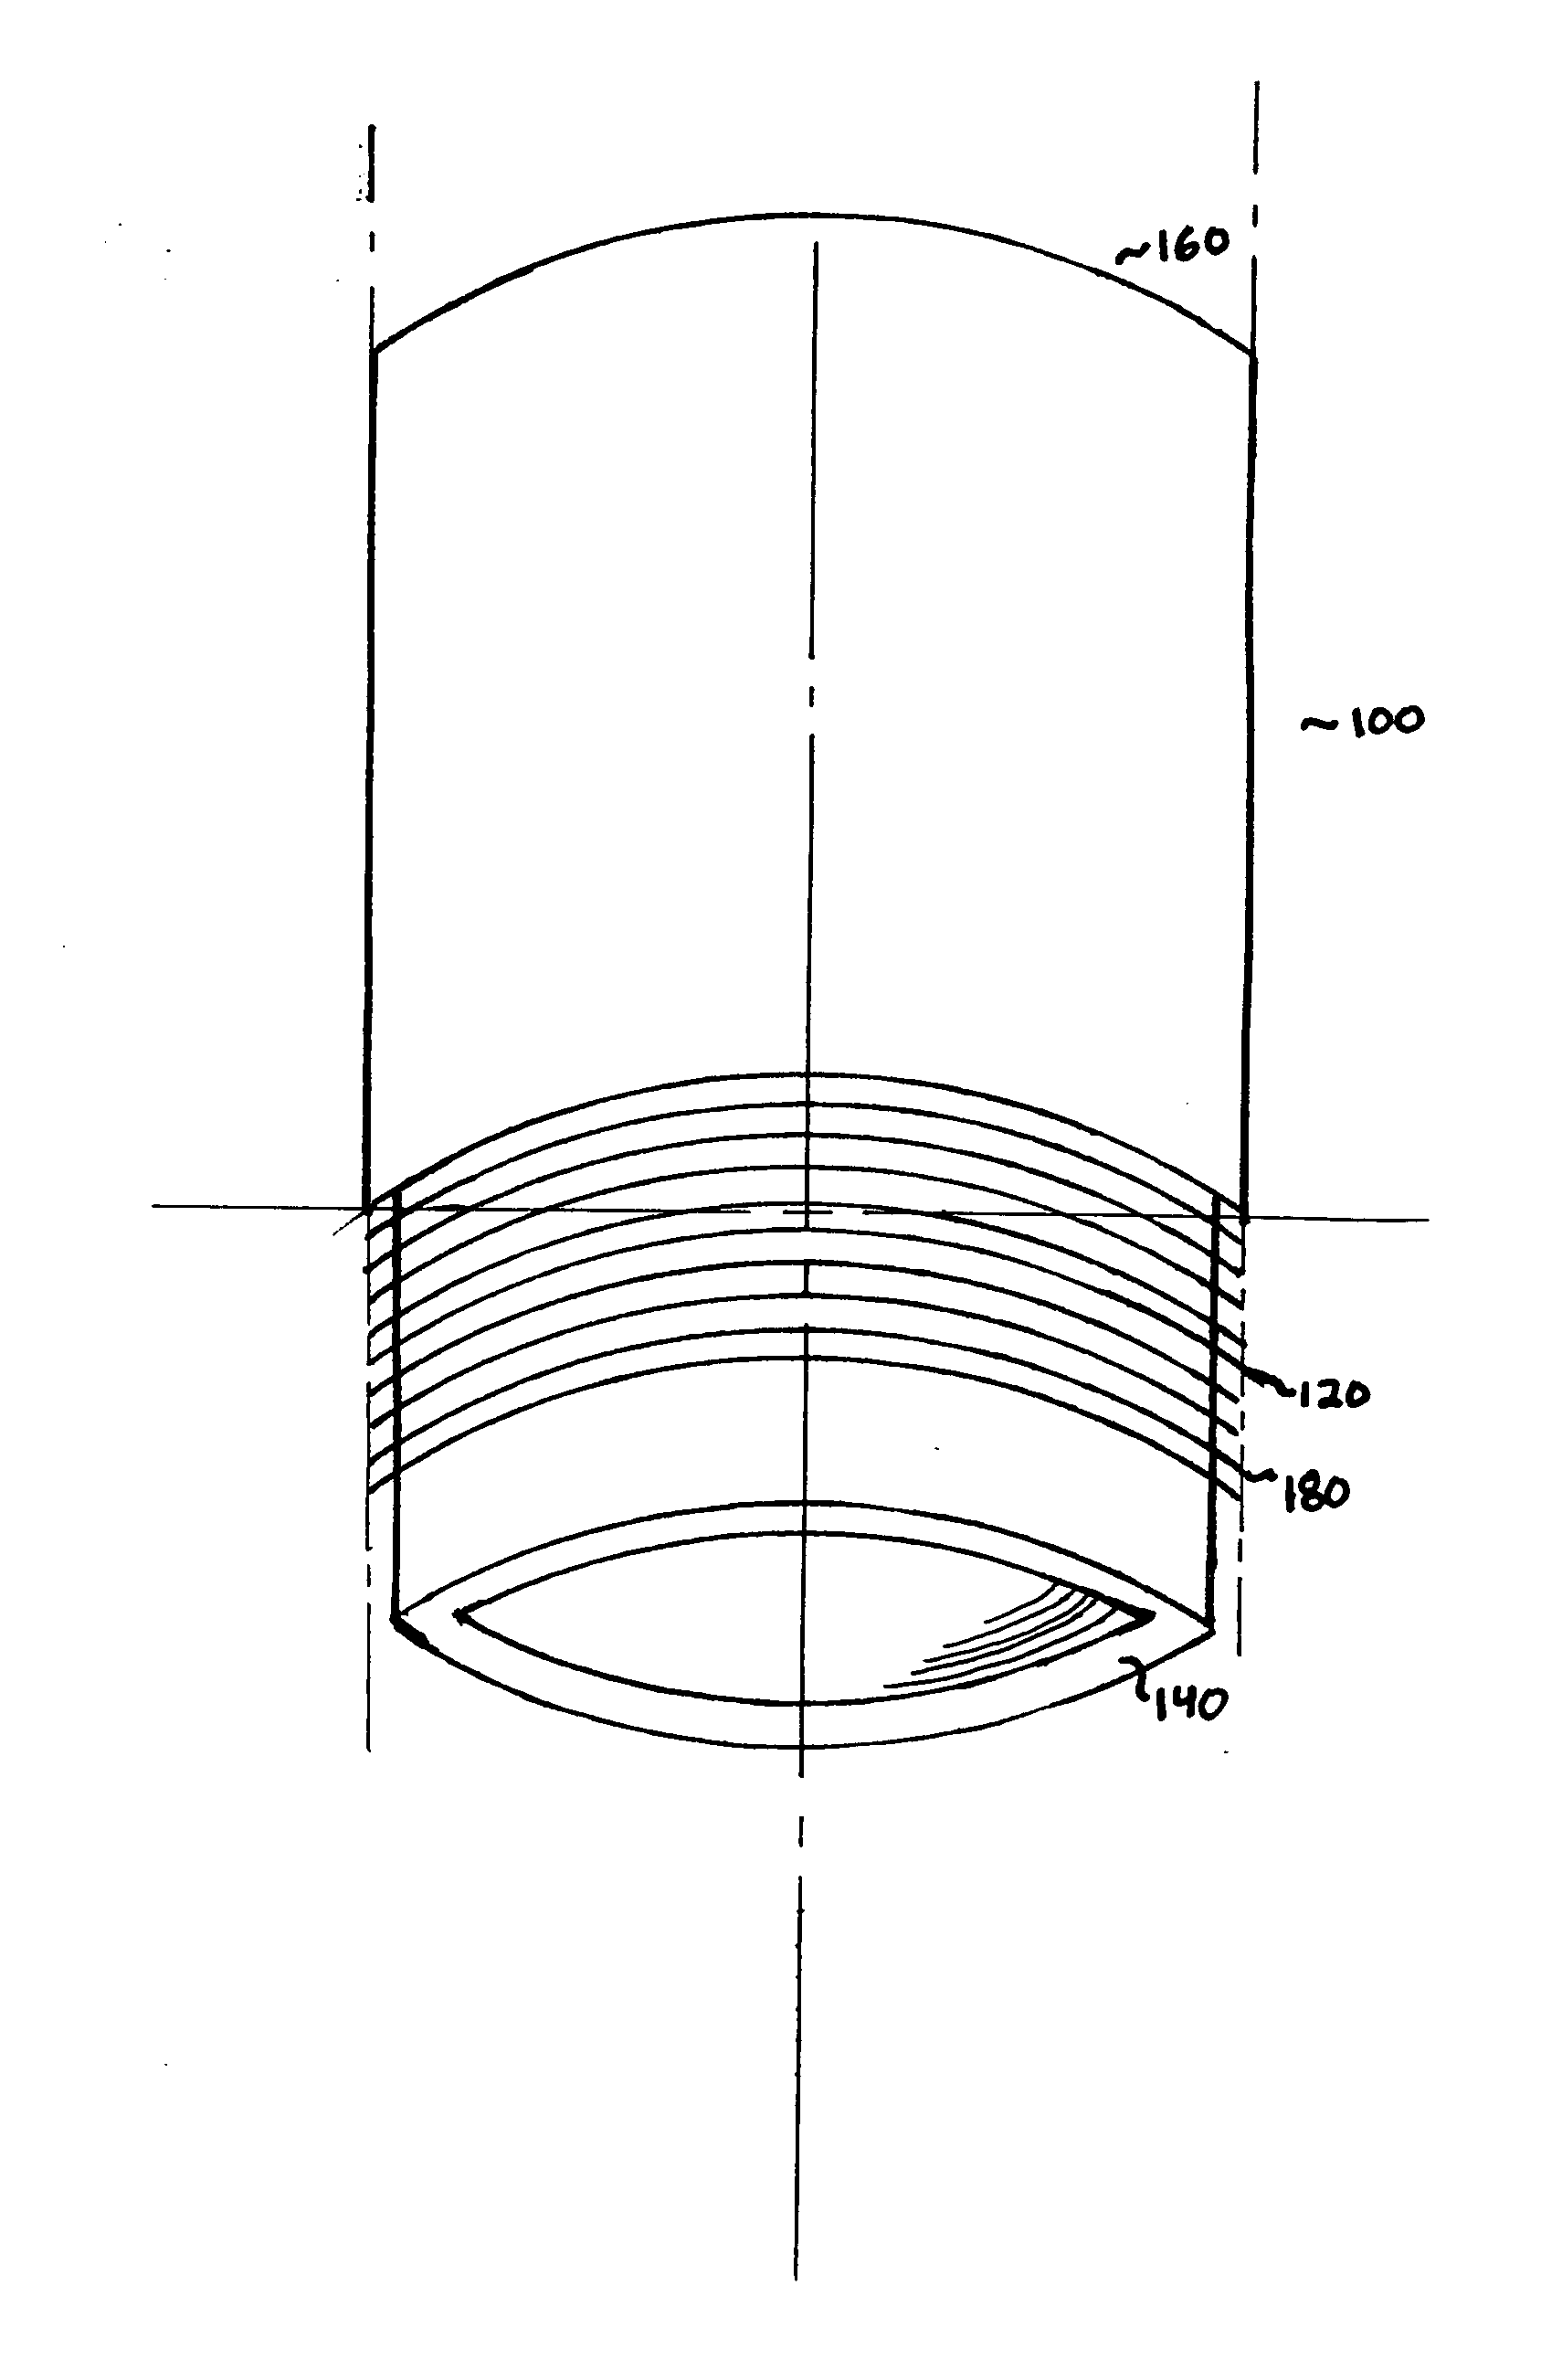 Small bowl filtered smoking apparatus and method for using same